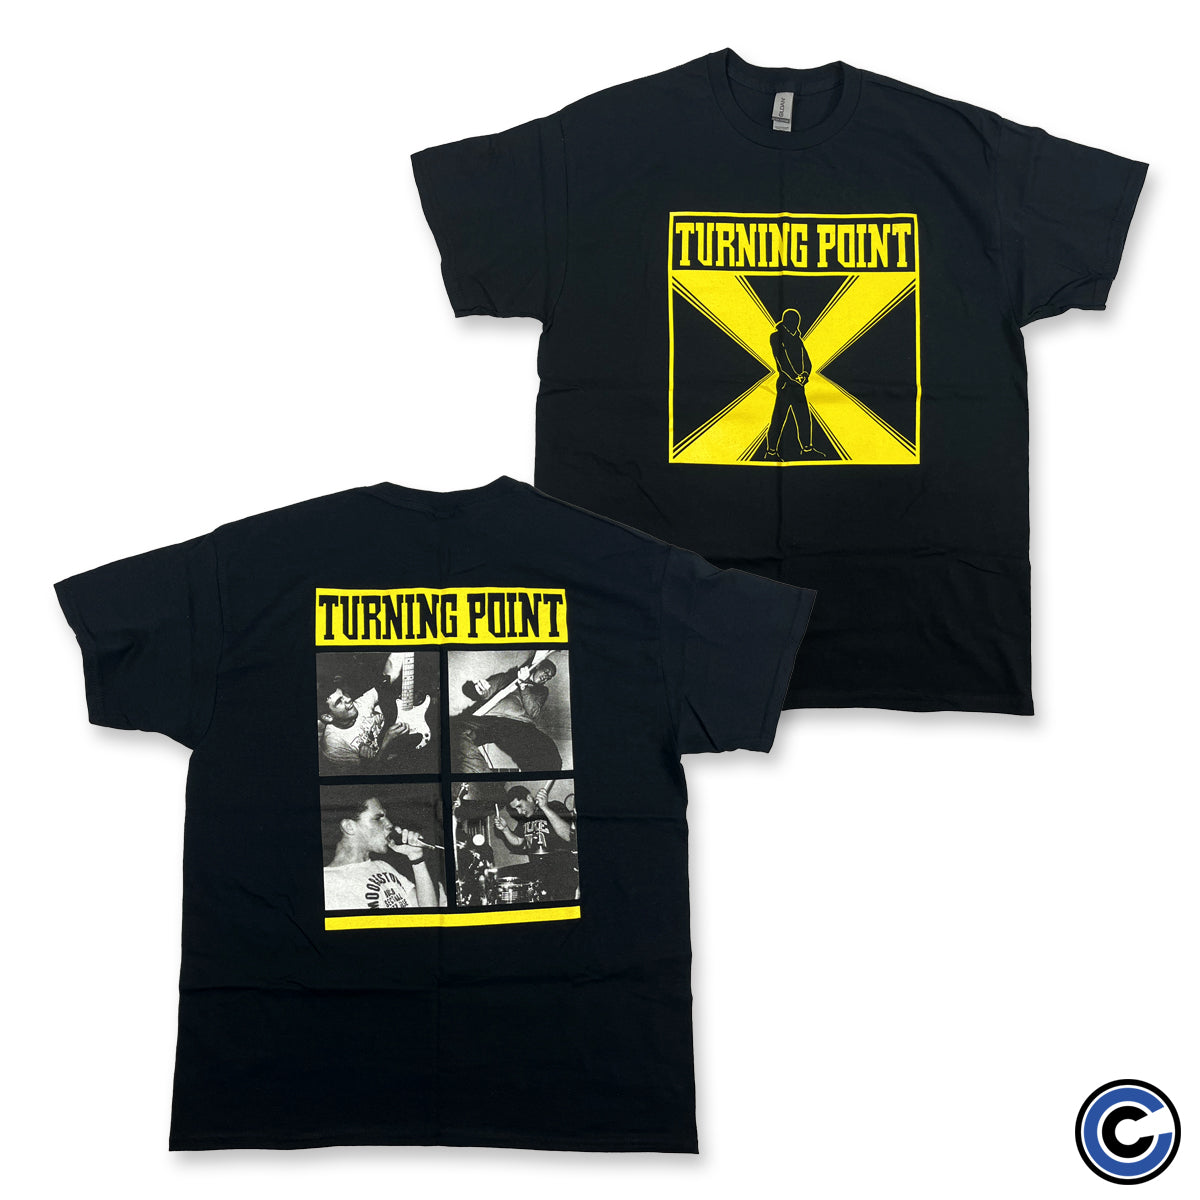 Turning Point "7" Cover" Shirt